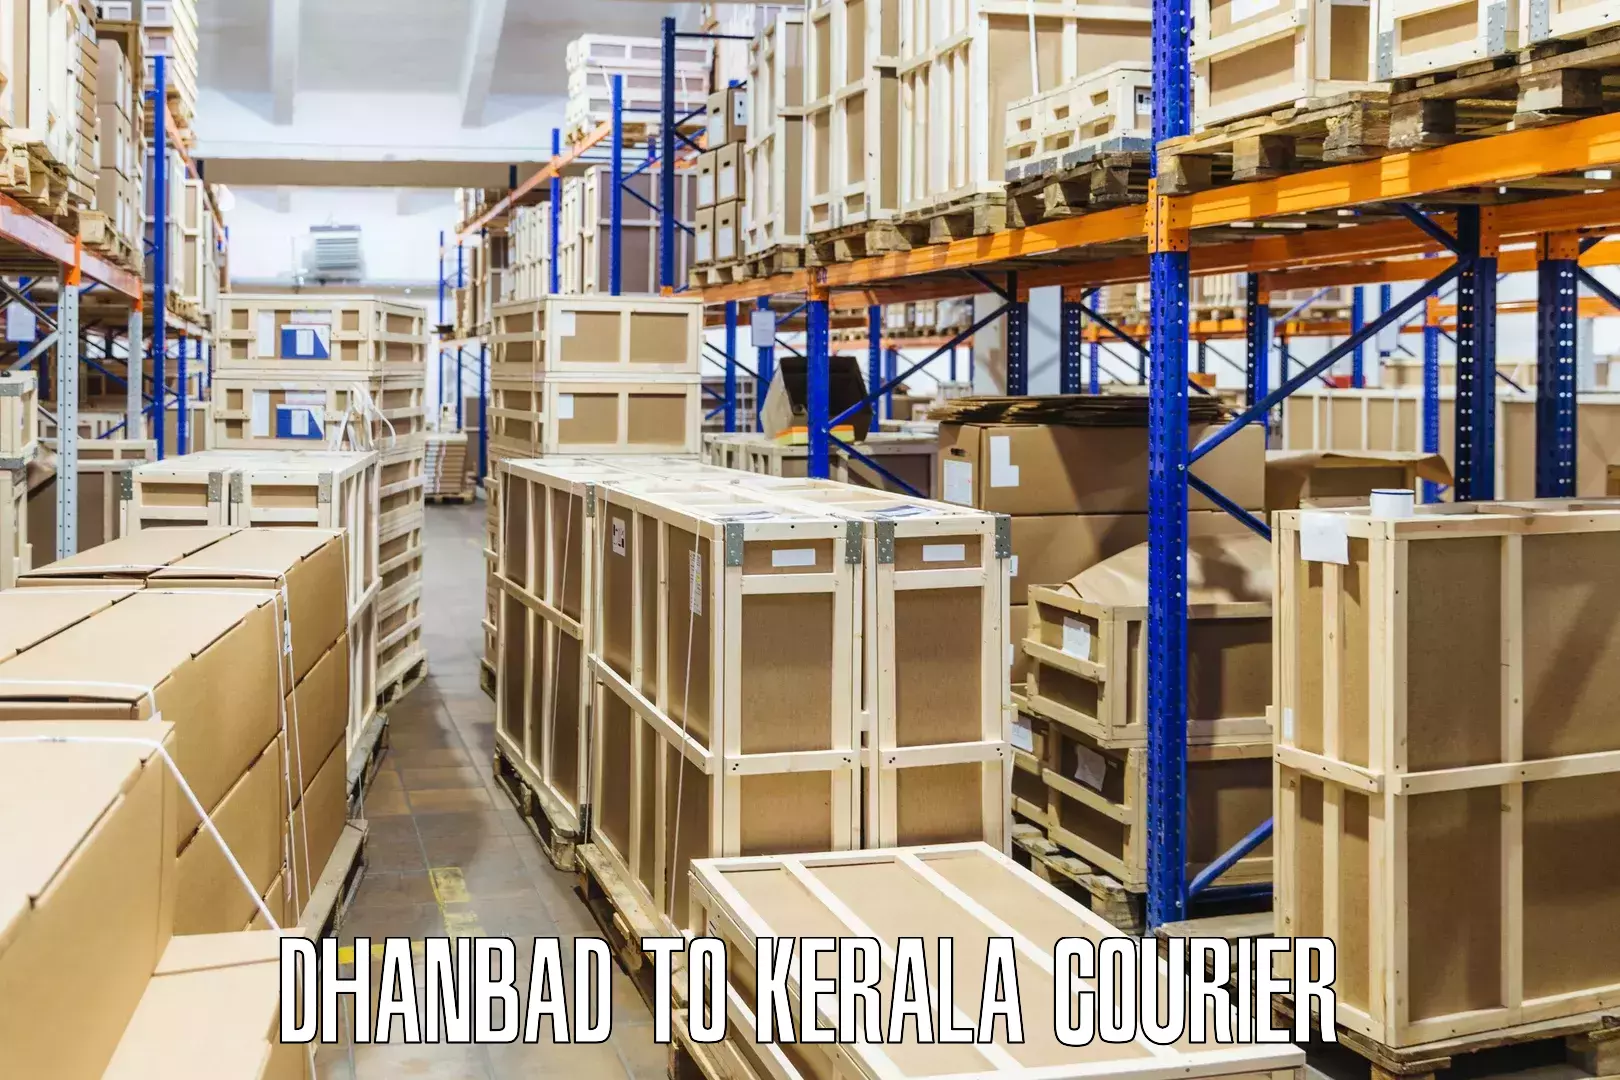 Multi-national courier services Dhanbad to Kerala